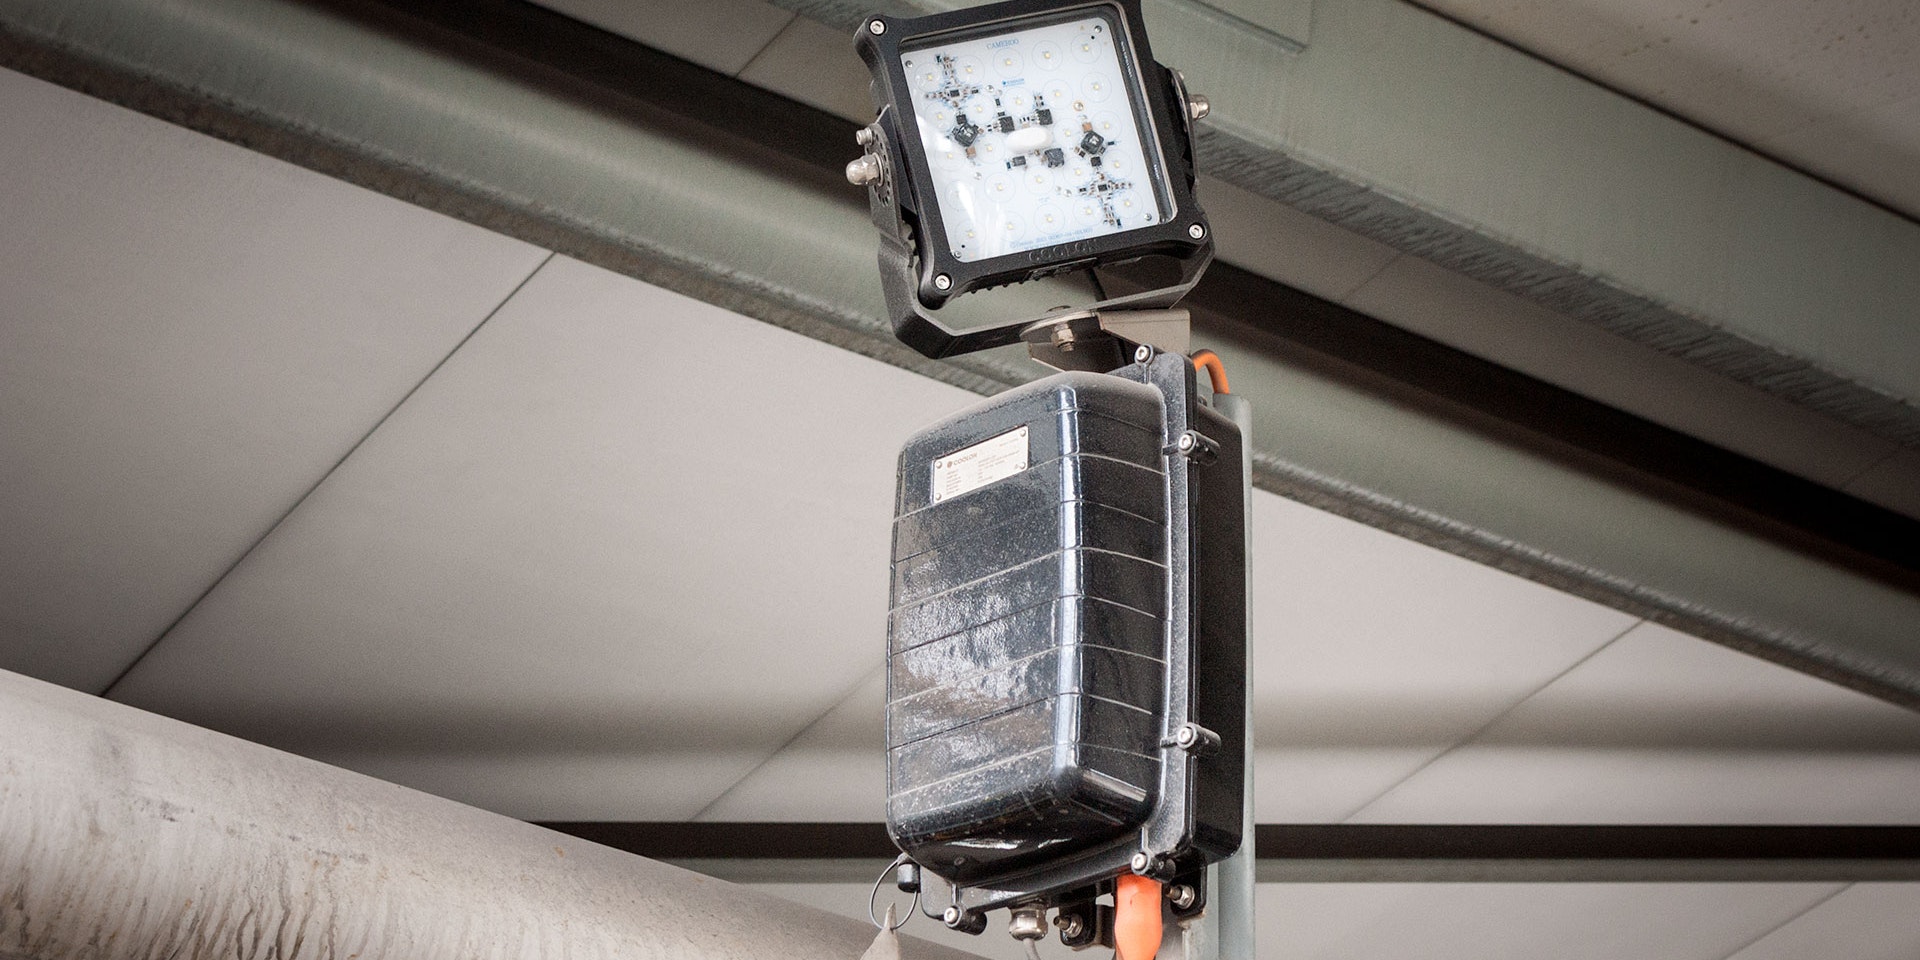 Warden LED Flood Light in application,installed on a wall on an industrial / mine site